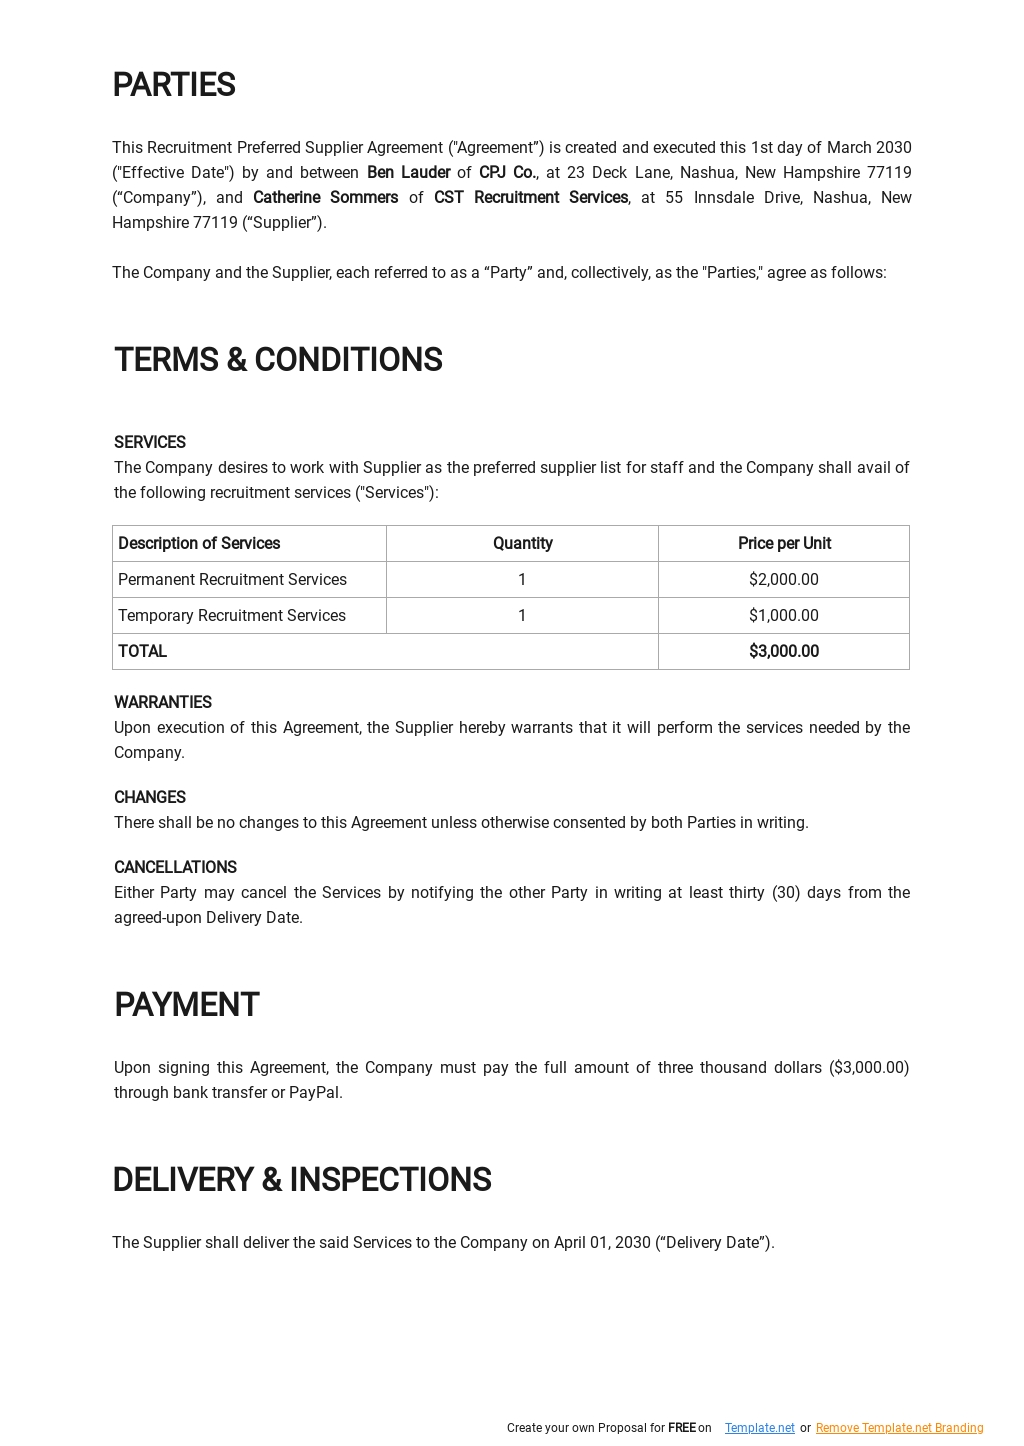 Supplier Quality Agreement Template